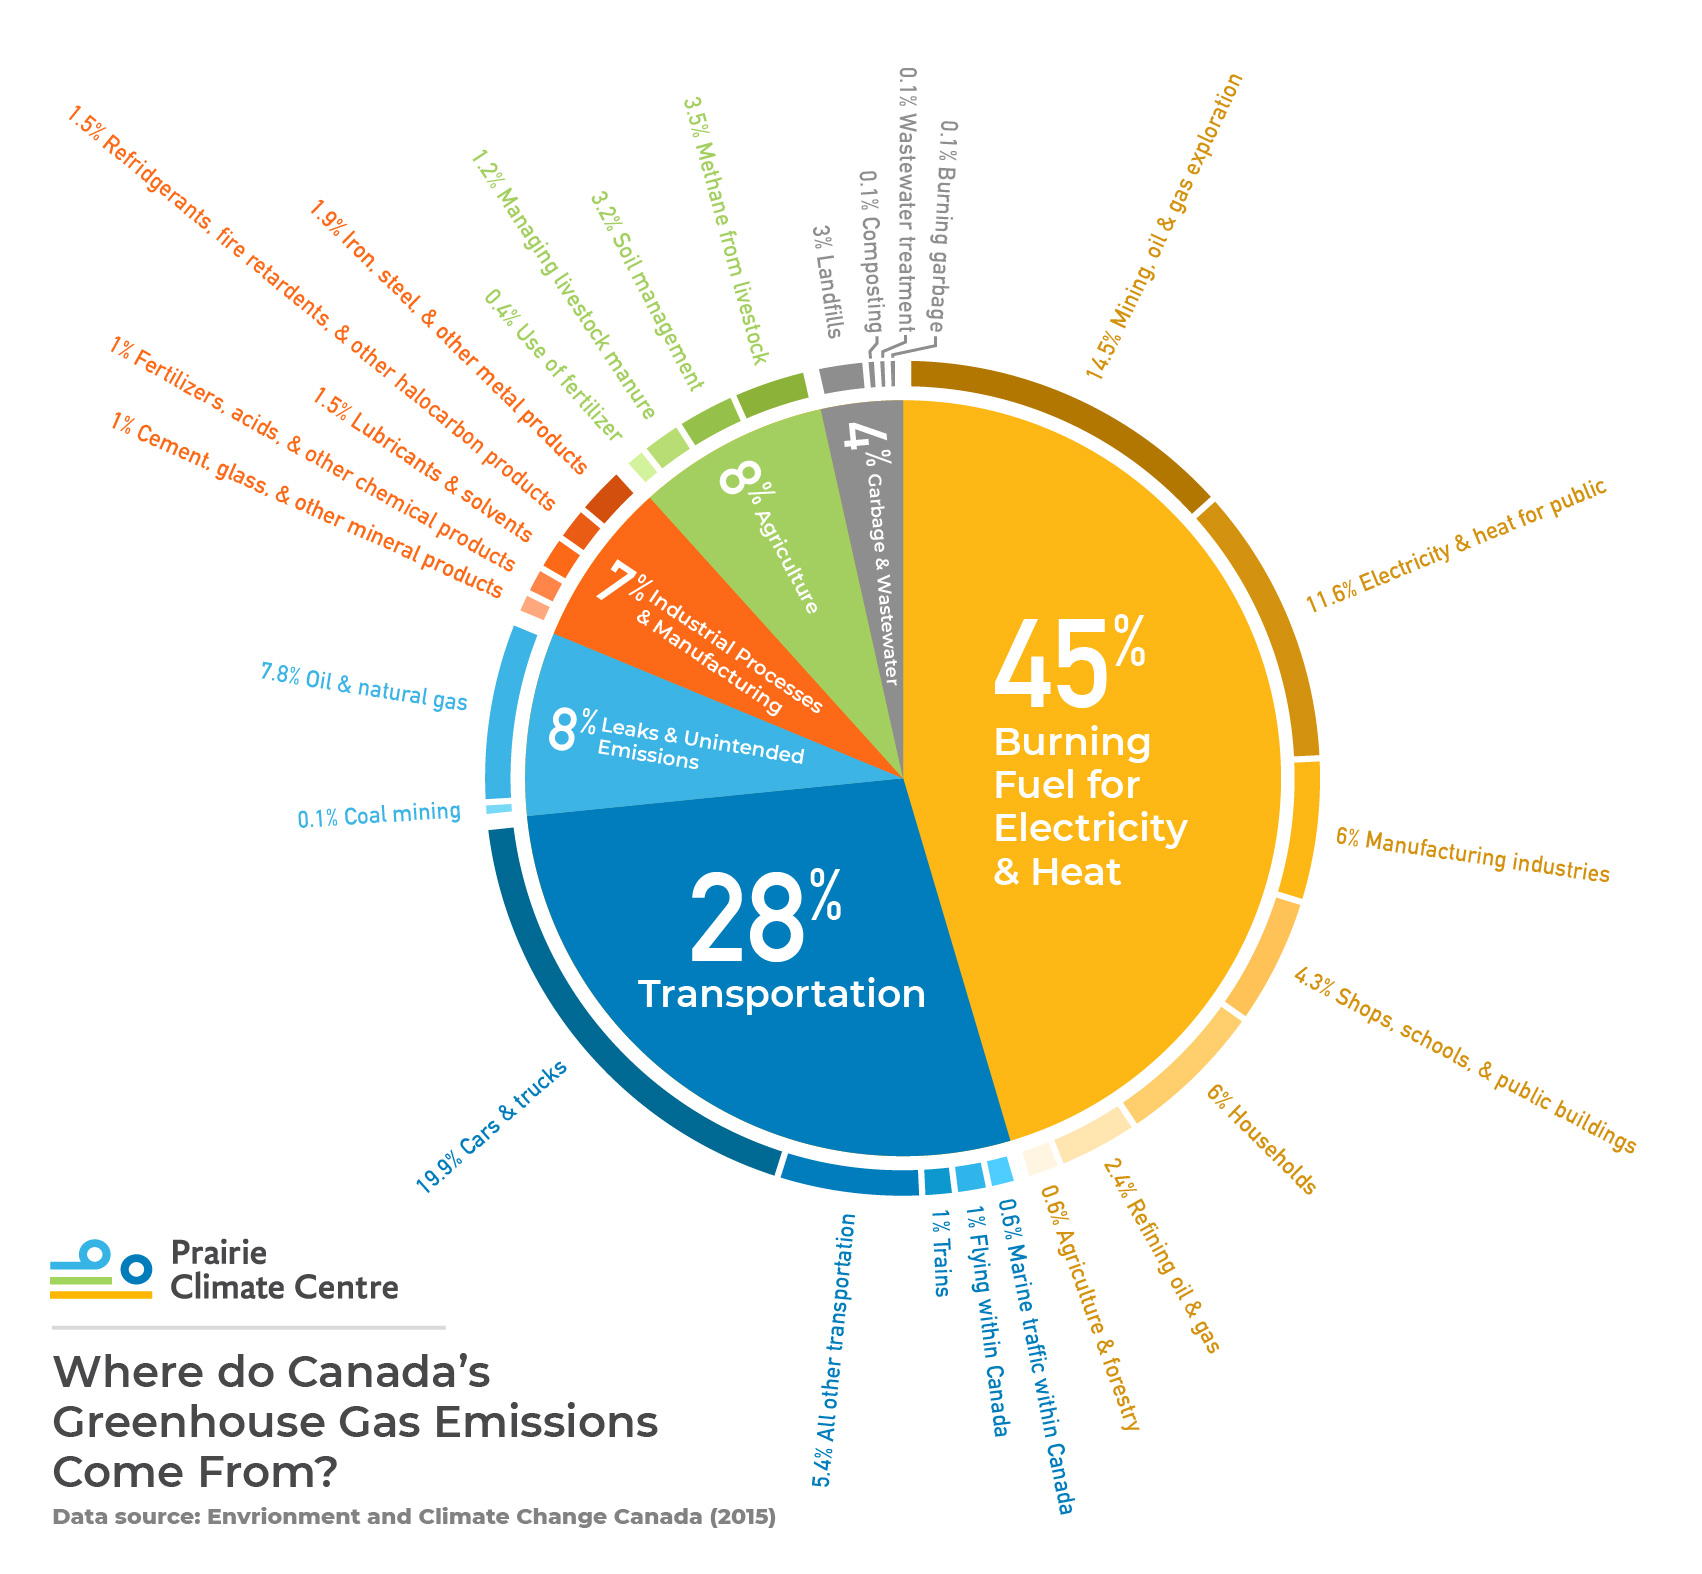  Sources of Greenhouse Gases in Canada